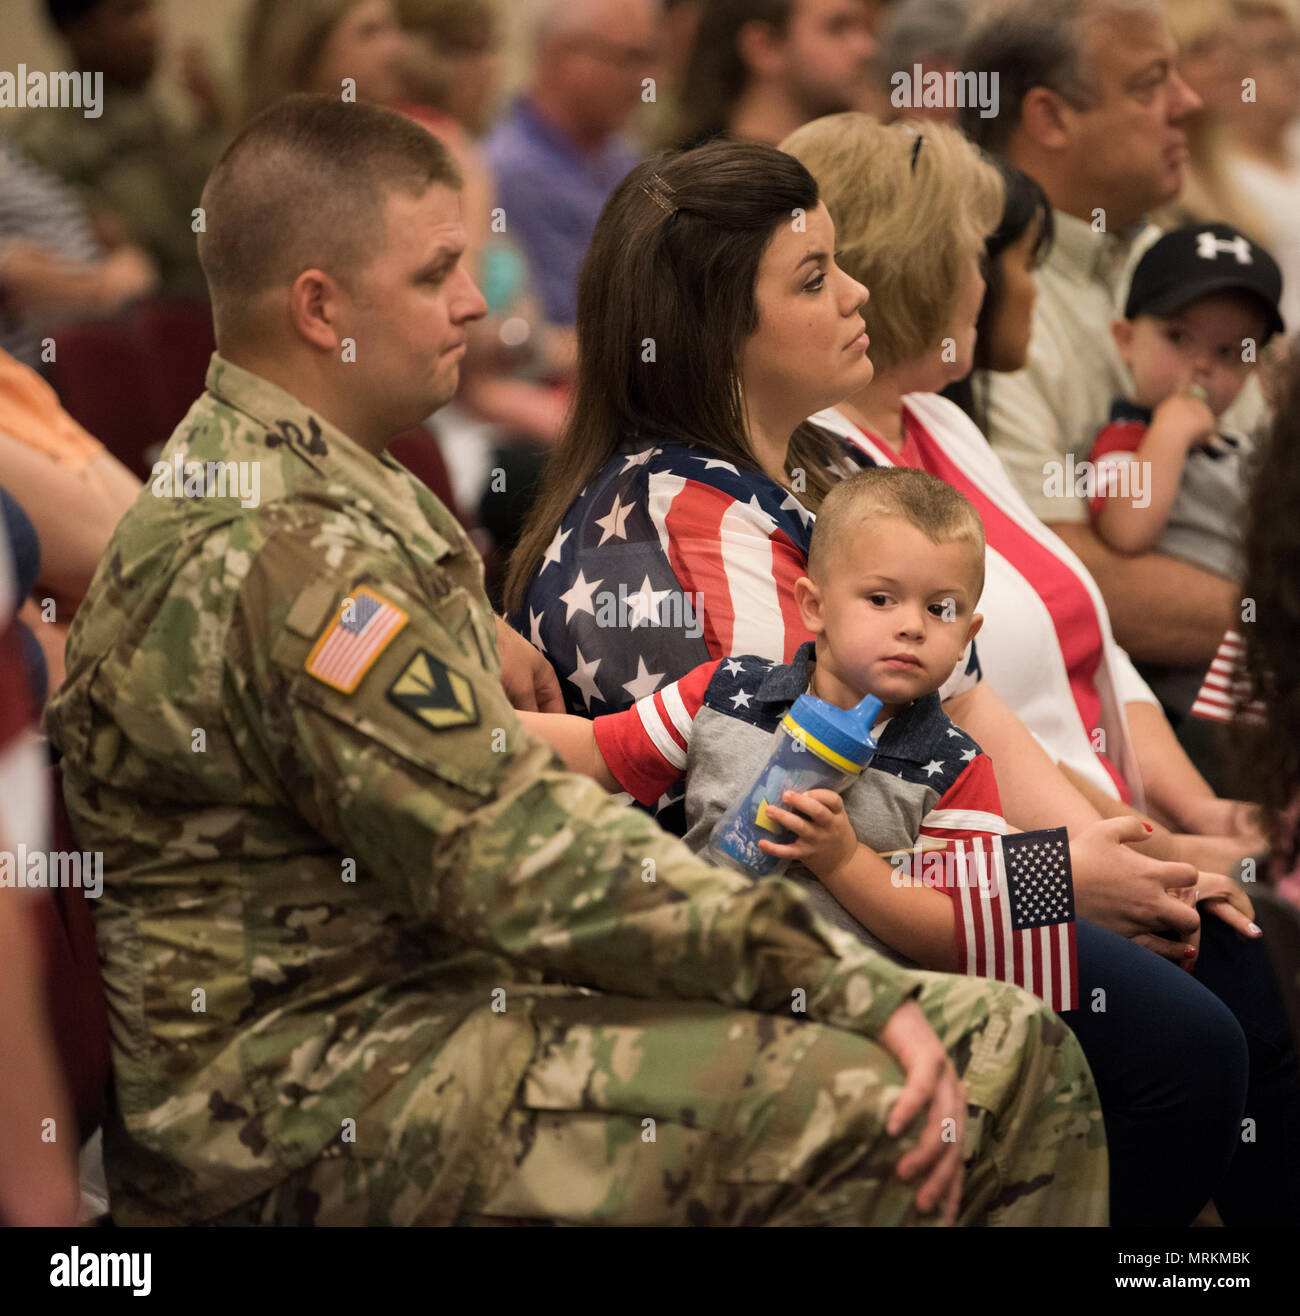 ROBINSON MANEUVER TRAINING CENTER, N. Little Rock, Ark.:— Staff Sgt. Byron Doughty, a member of the Arkansas National Guard's 39th Infantry Brigade Combat Team, and his son Byron listen to a speaker during a sendoff ceremony for the unit at Robinson Maneuver Training Center in North Little Rock on Thursday, June 22, 2107. Doughty and other Soldiers from the 39th IBCT are joining other members of their unit already deployed on the year-long mission to support the NATO peacekeeping forces in Kosovo and will be serving in the Balkan cities of Pristina and Sarajevo. (U.S. Army National Guard Phot Stock Photo